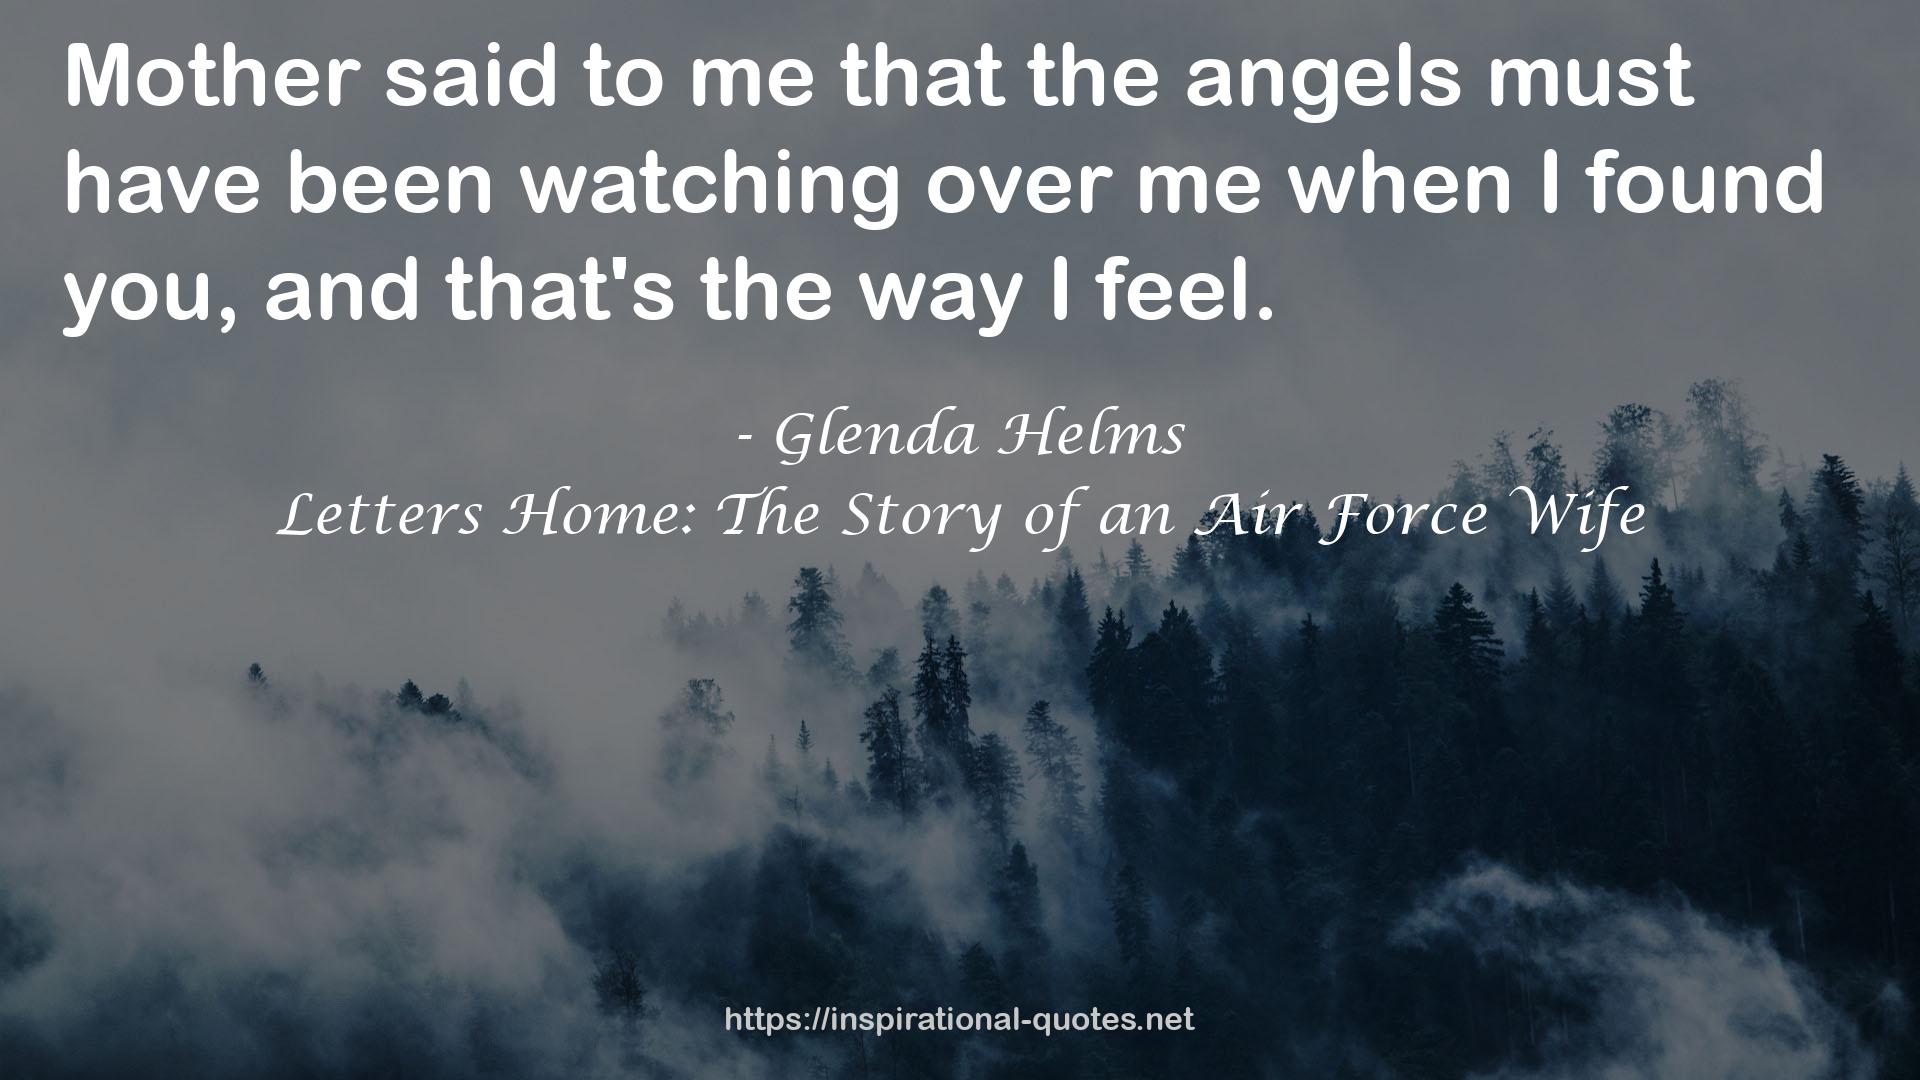 Letters Home: The Story of an Air Force Wife QUOTES